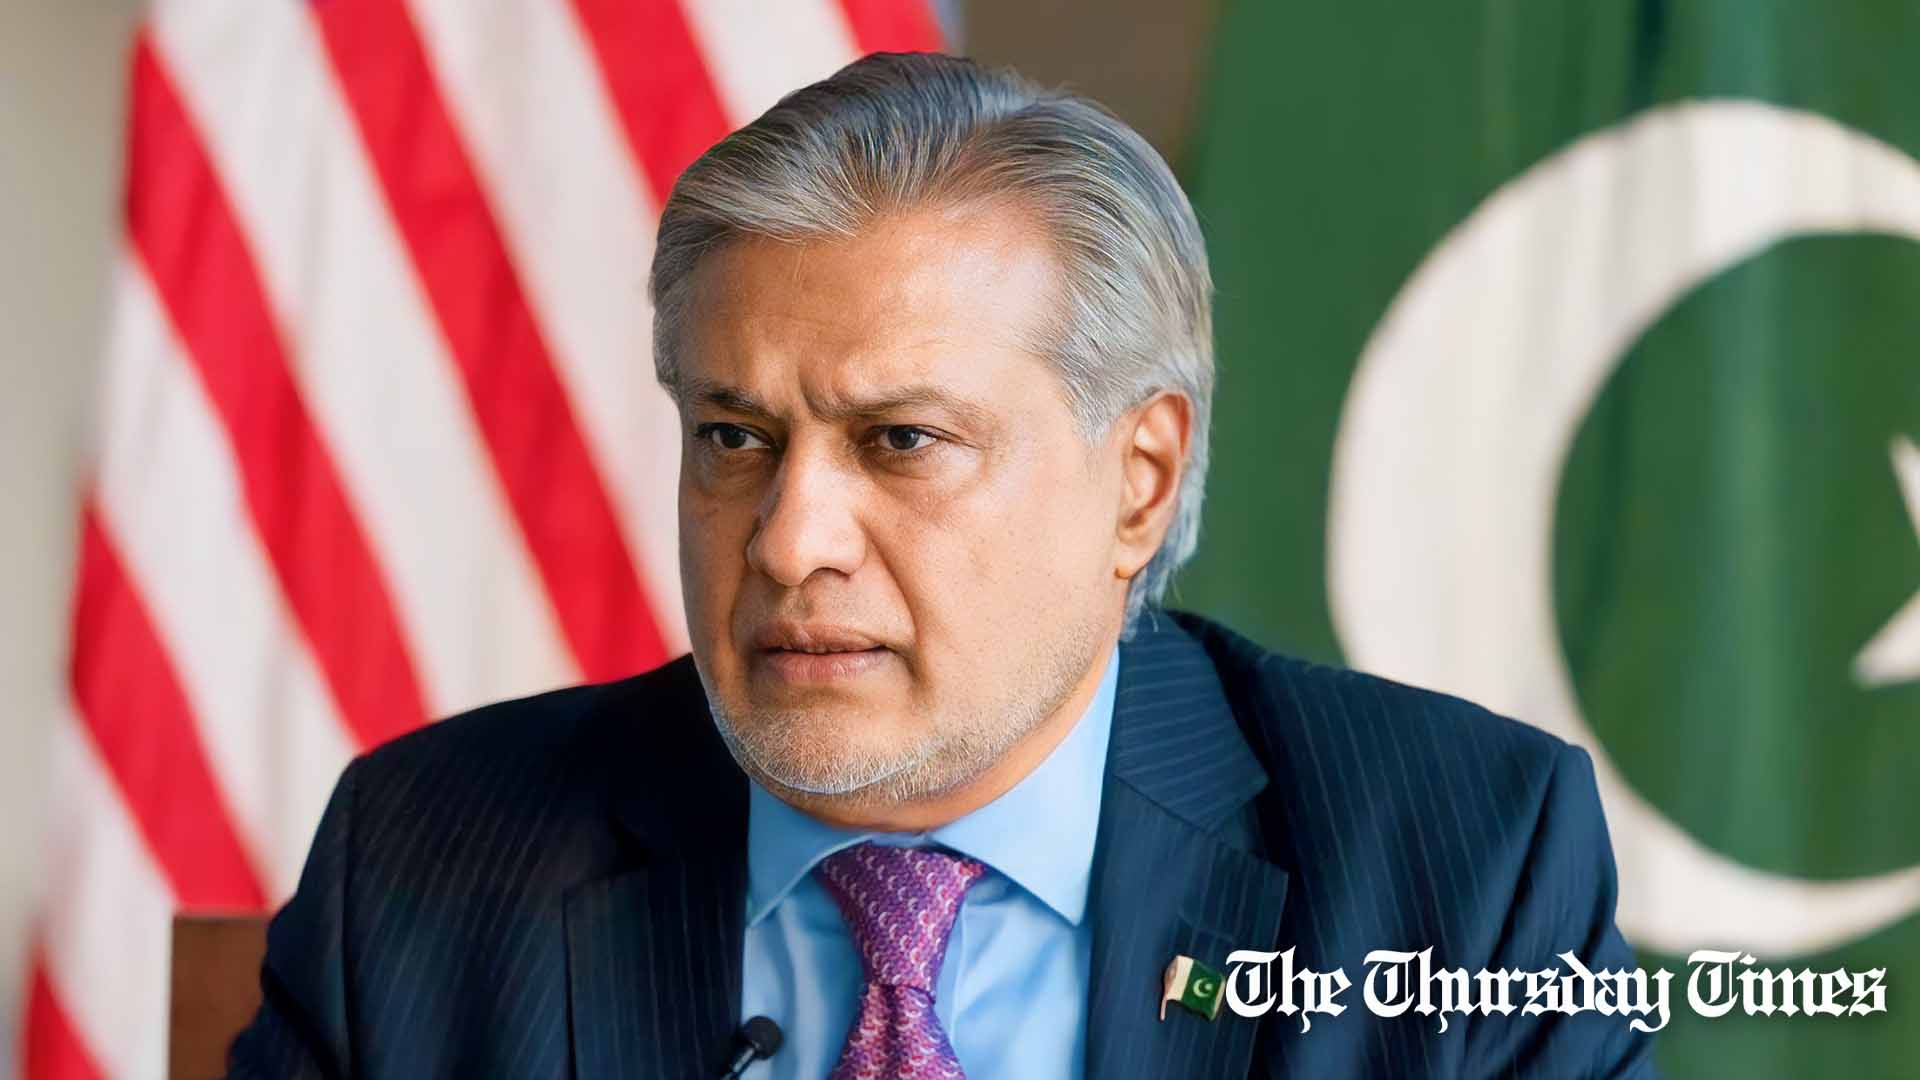 A file photo is shown of finance minister Ishaq Dar at Washington, D.C. — FILE/THE THURSDAY TIMES